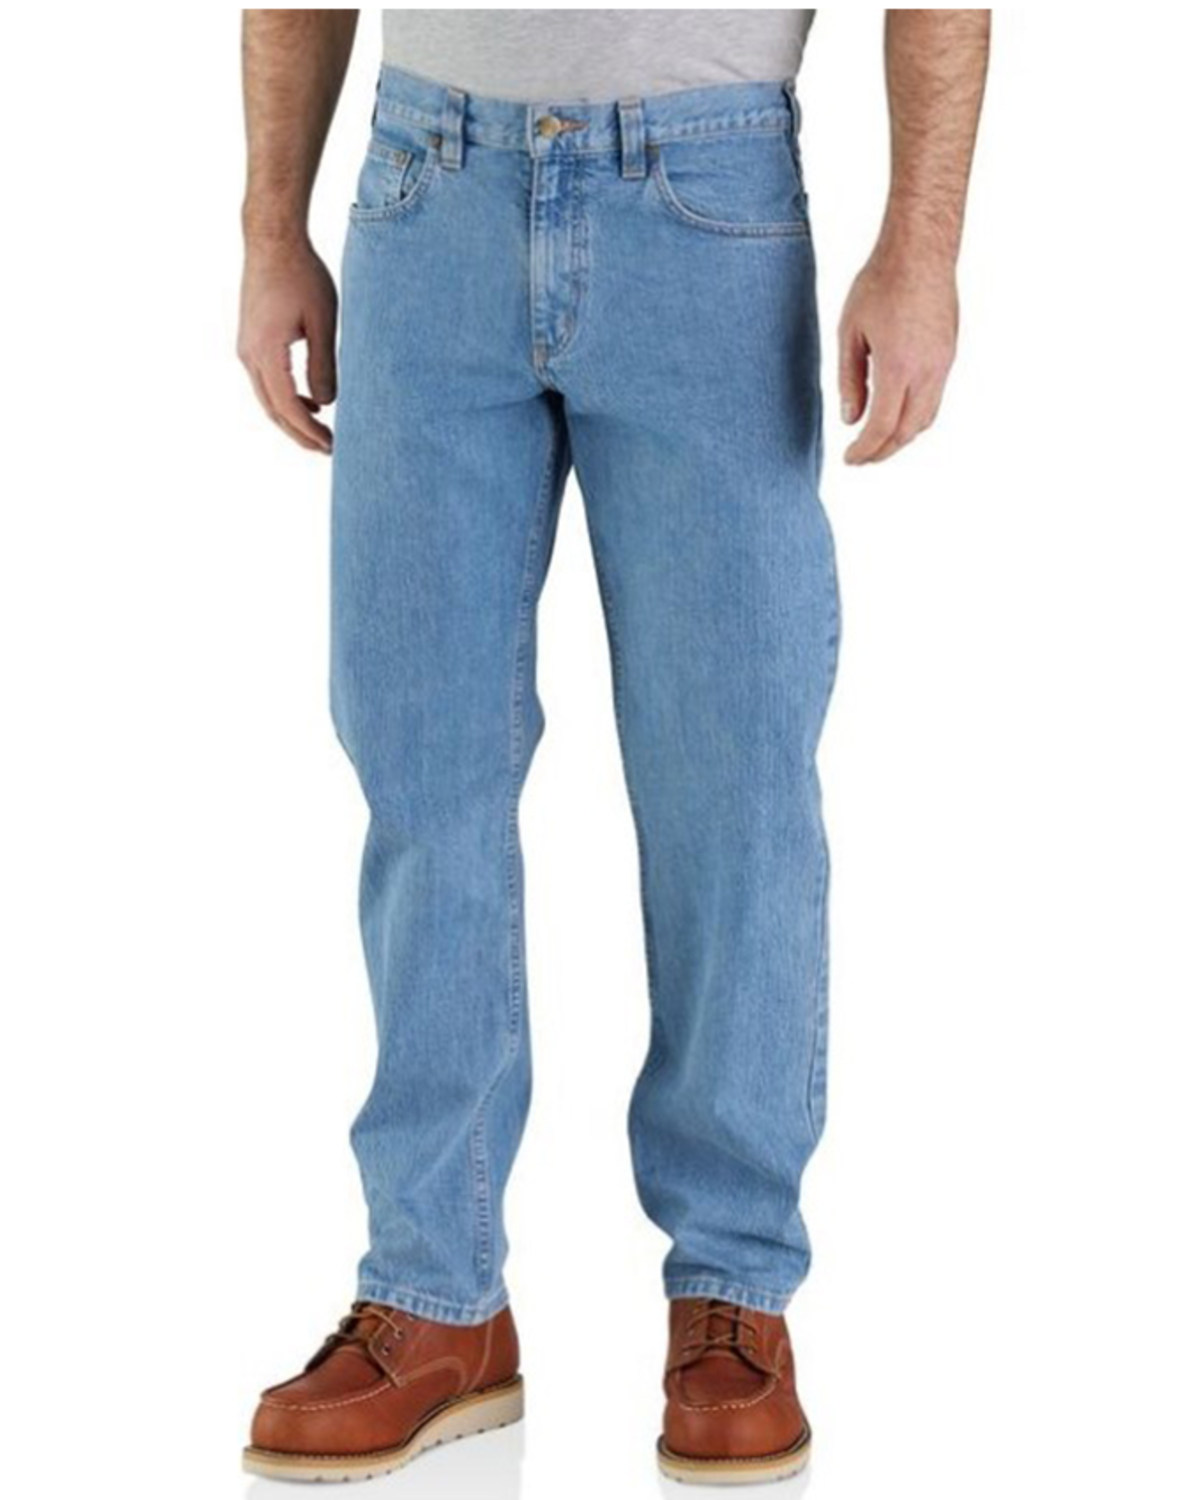 Carhartt Men's Relaxed Fit Light Wash Work Jeans